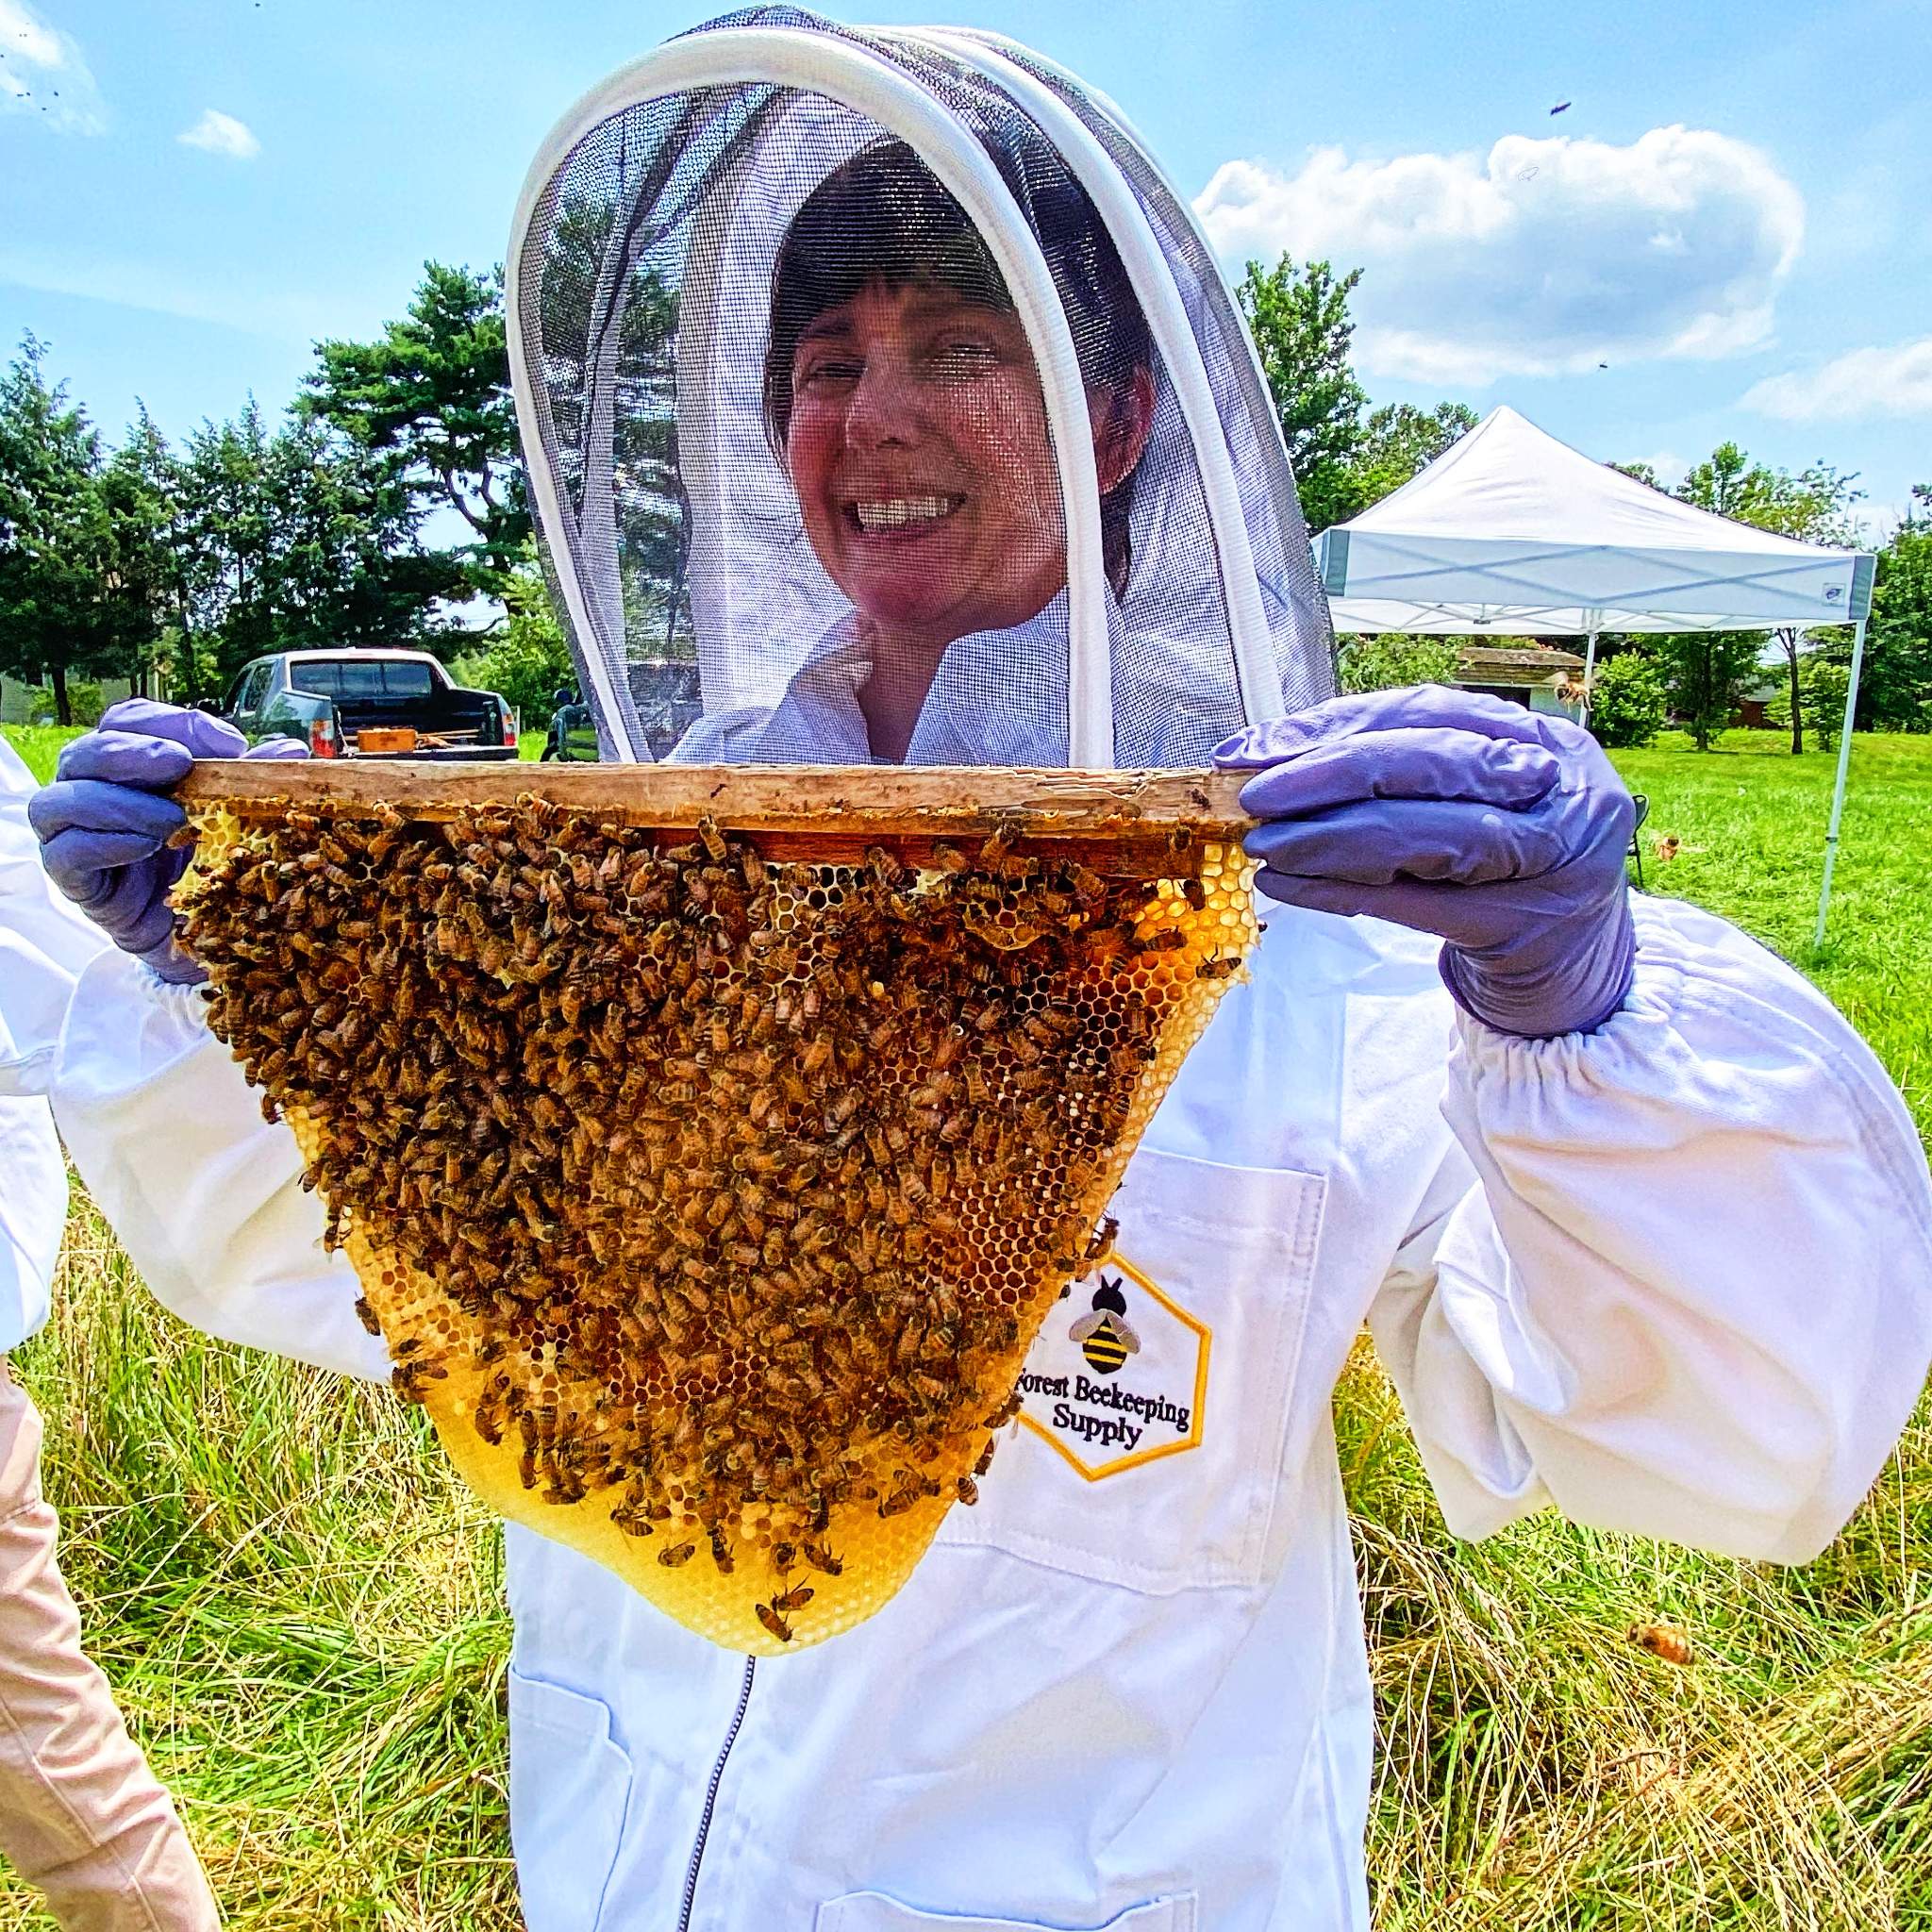 See a hive dive participant holding live bees for the first time